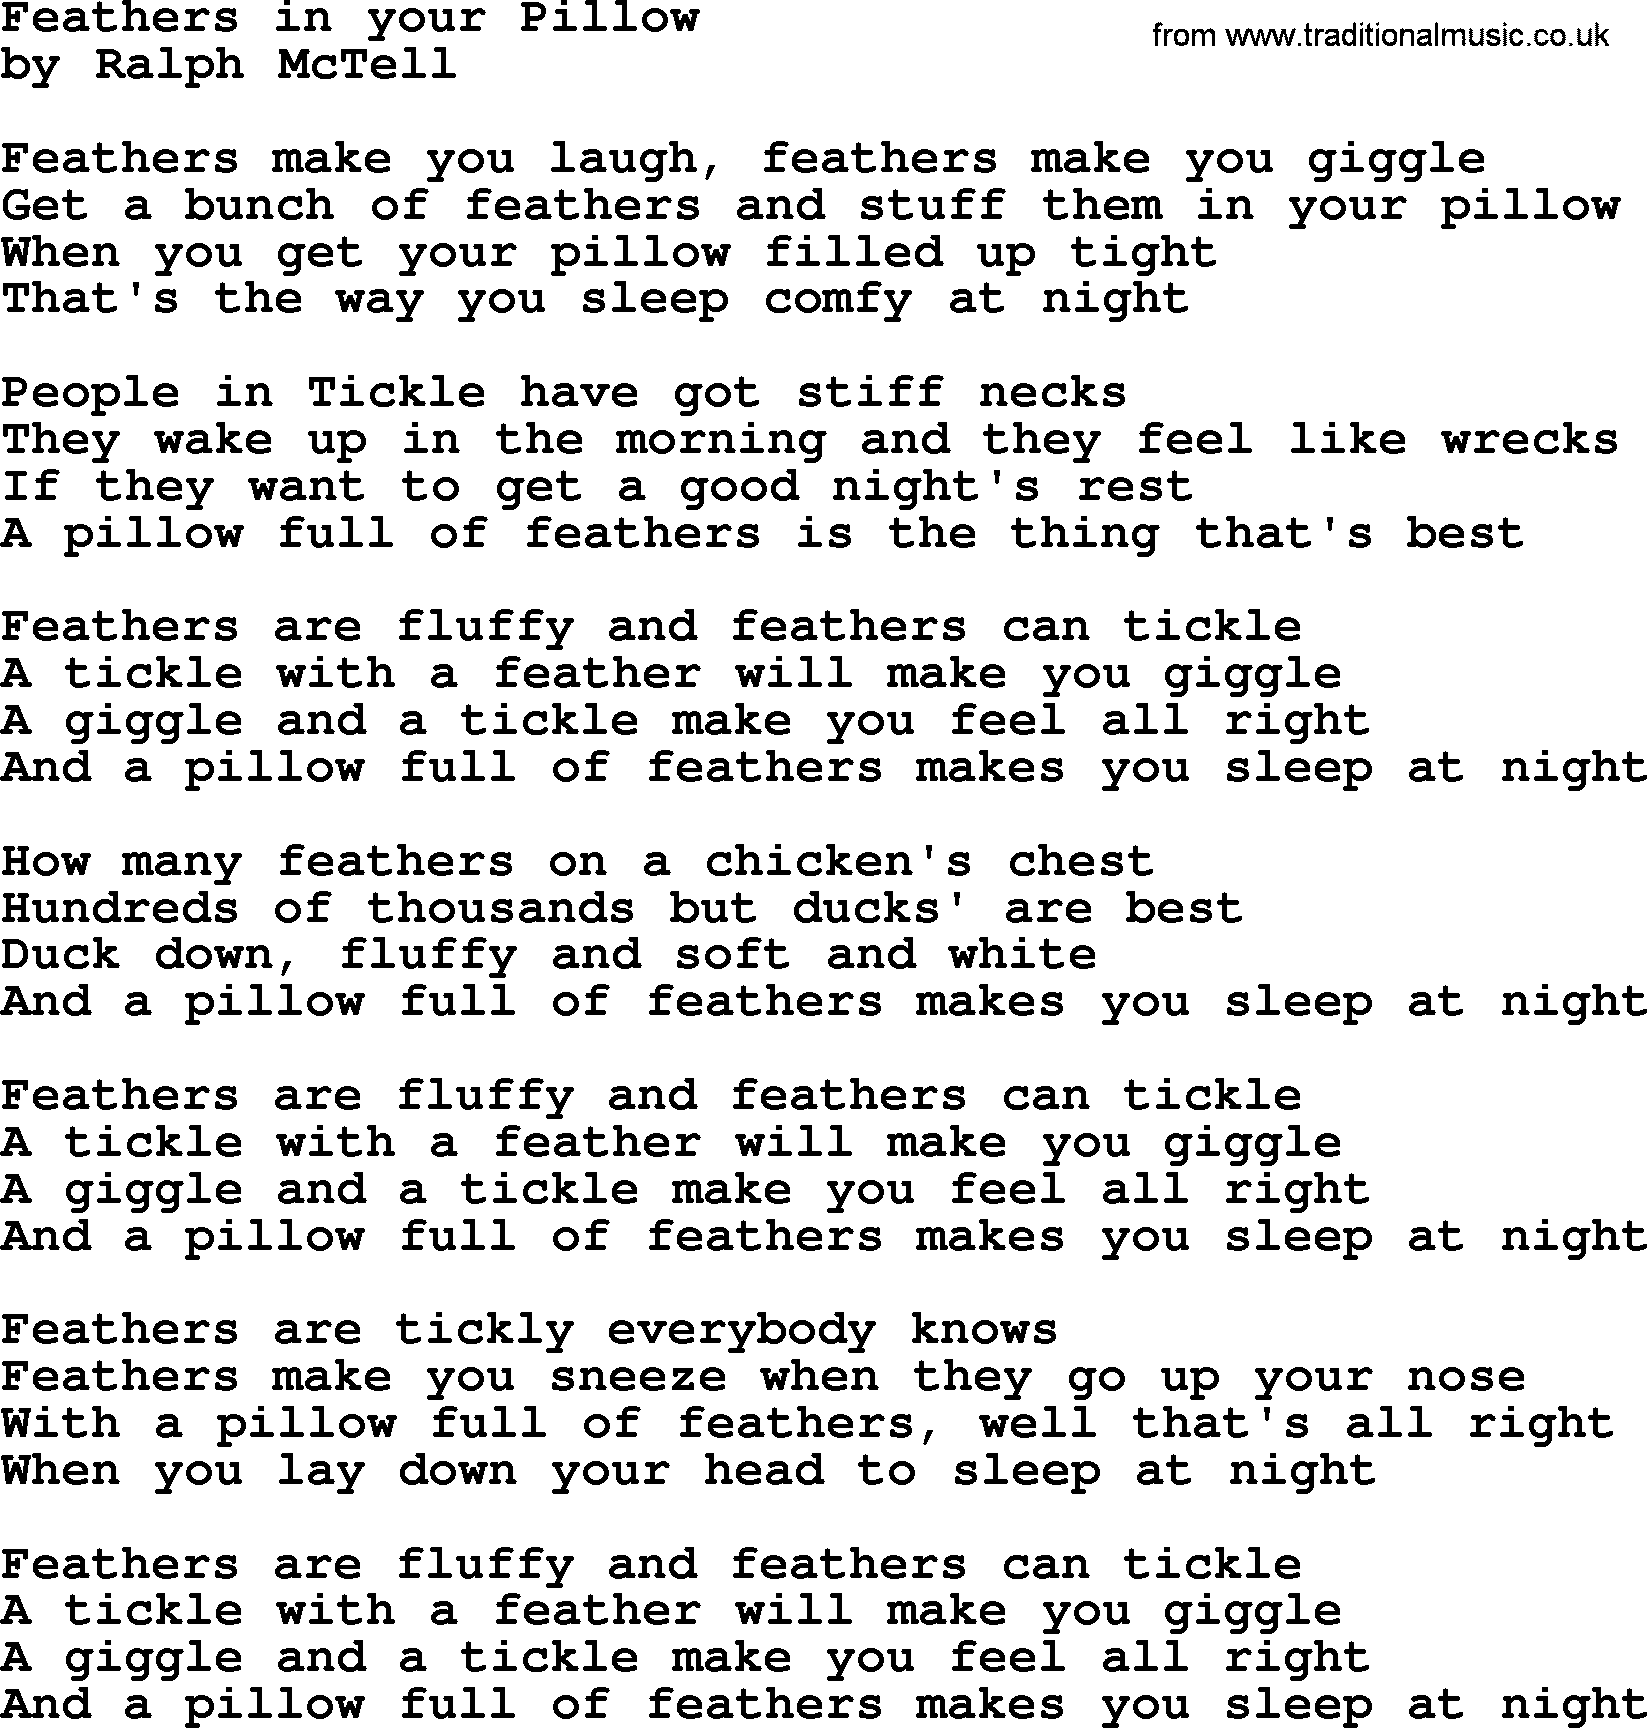 Ralph McTell Song: Feathers In Your Pillow, lyrics